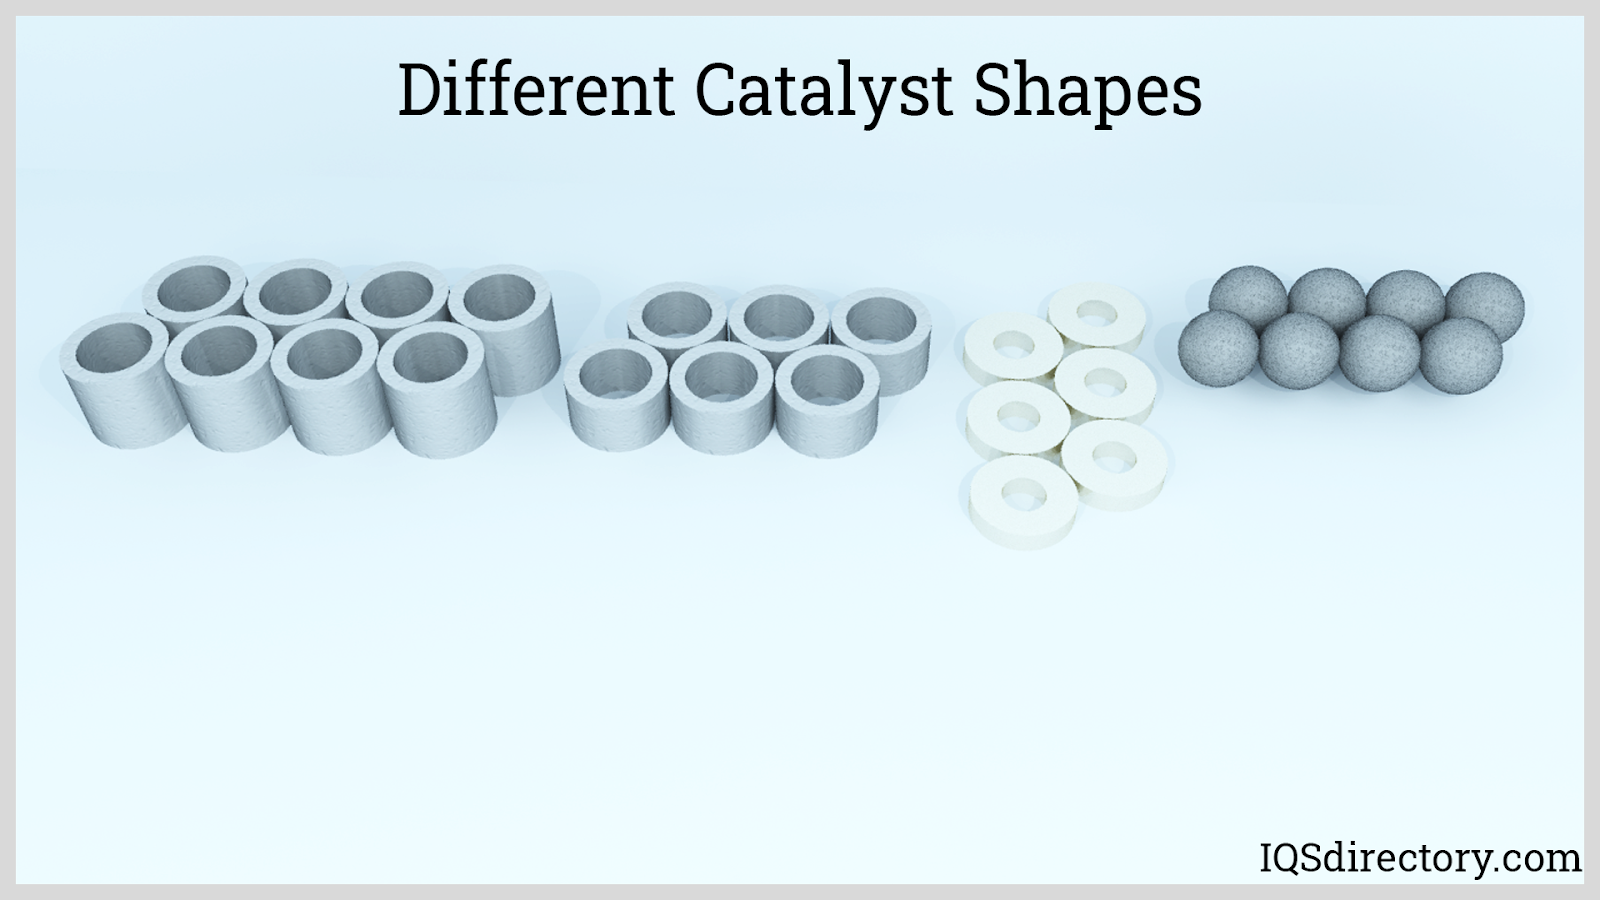 Different Catalyst Shapes